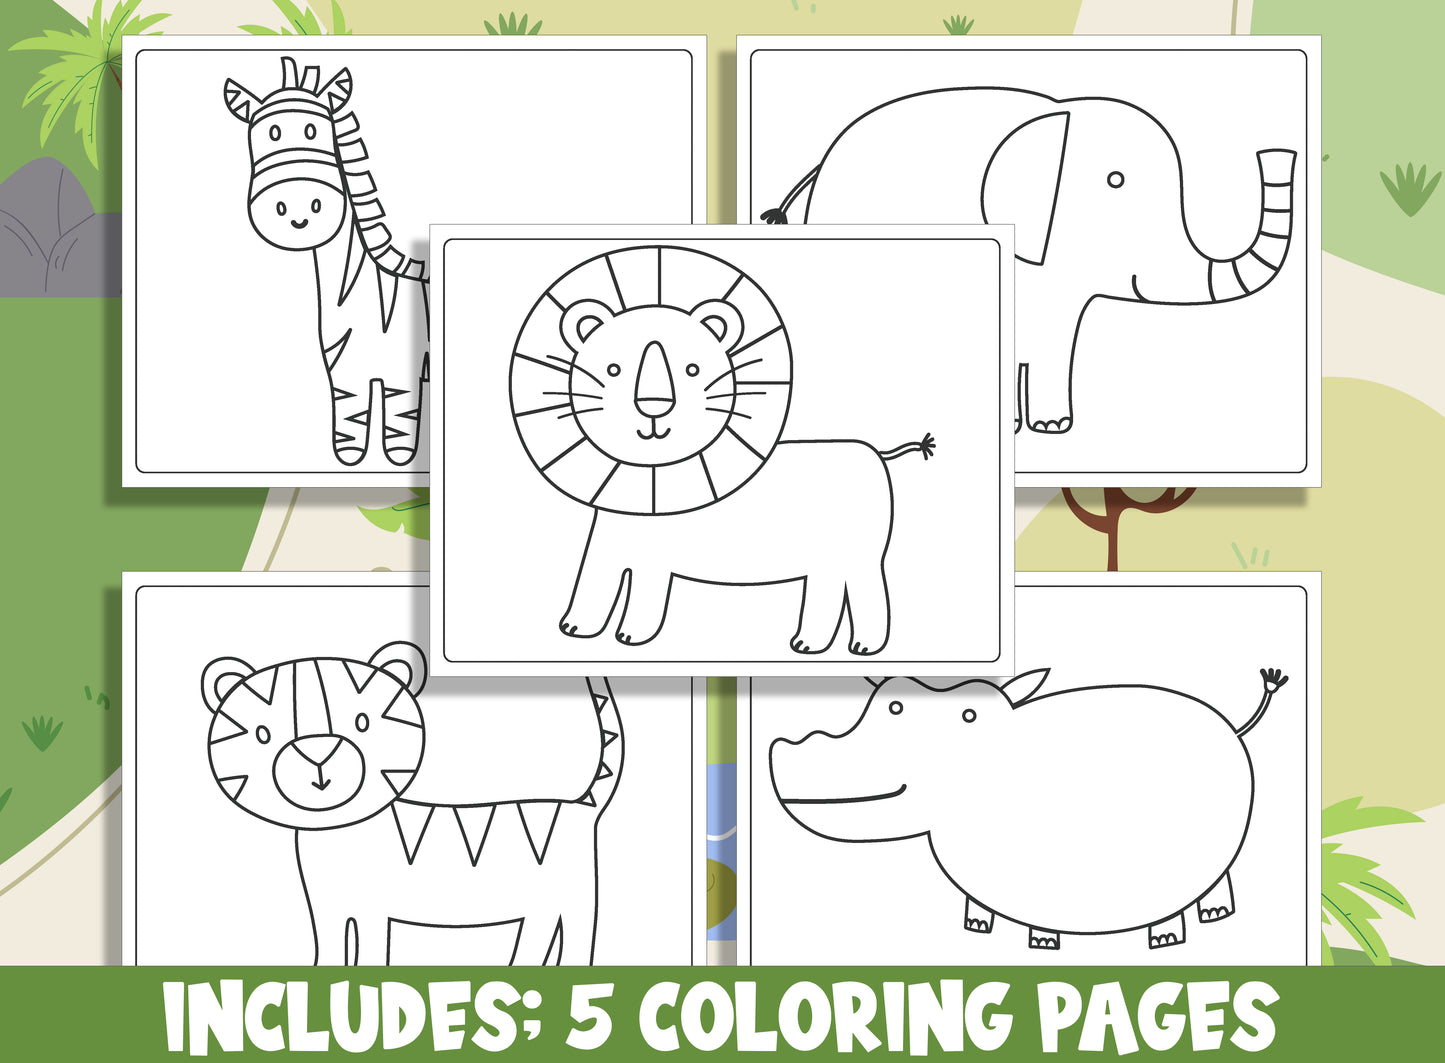 Learn How to Draw a Safari Animal (Lion, Tiger, Elephant, Hippopotamus, Zebra), Directed Drawing Step by Step Tutorial + 5 Coloring Pages